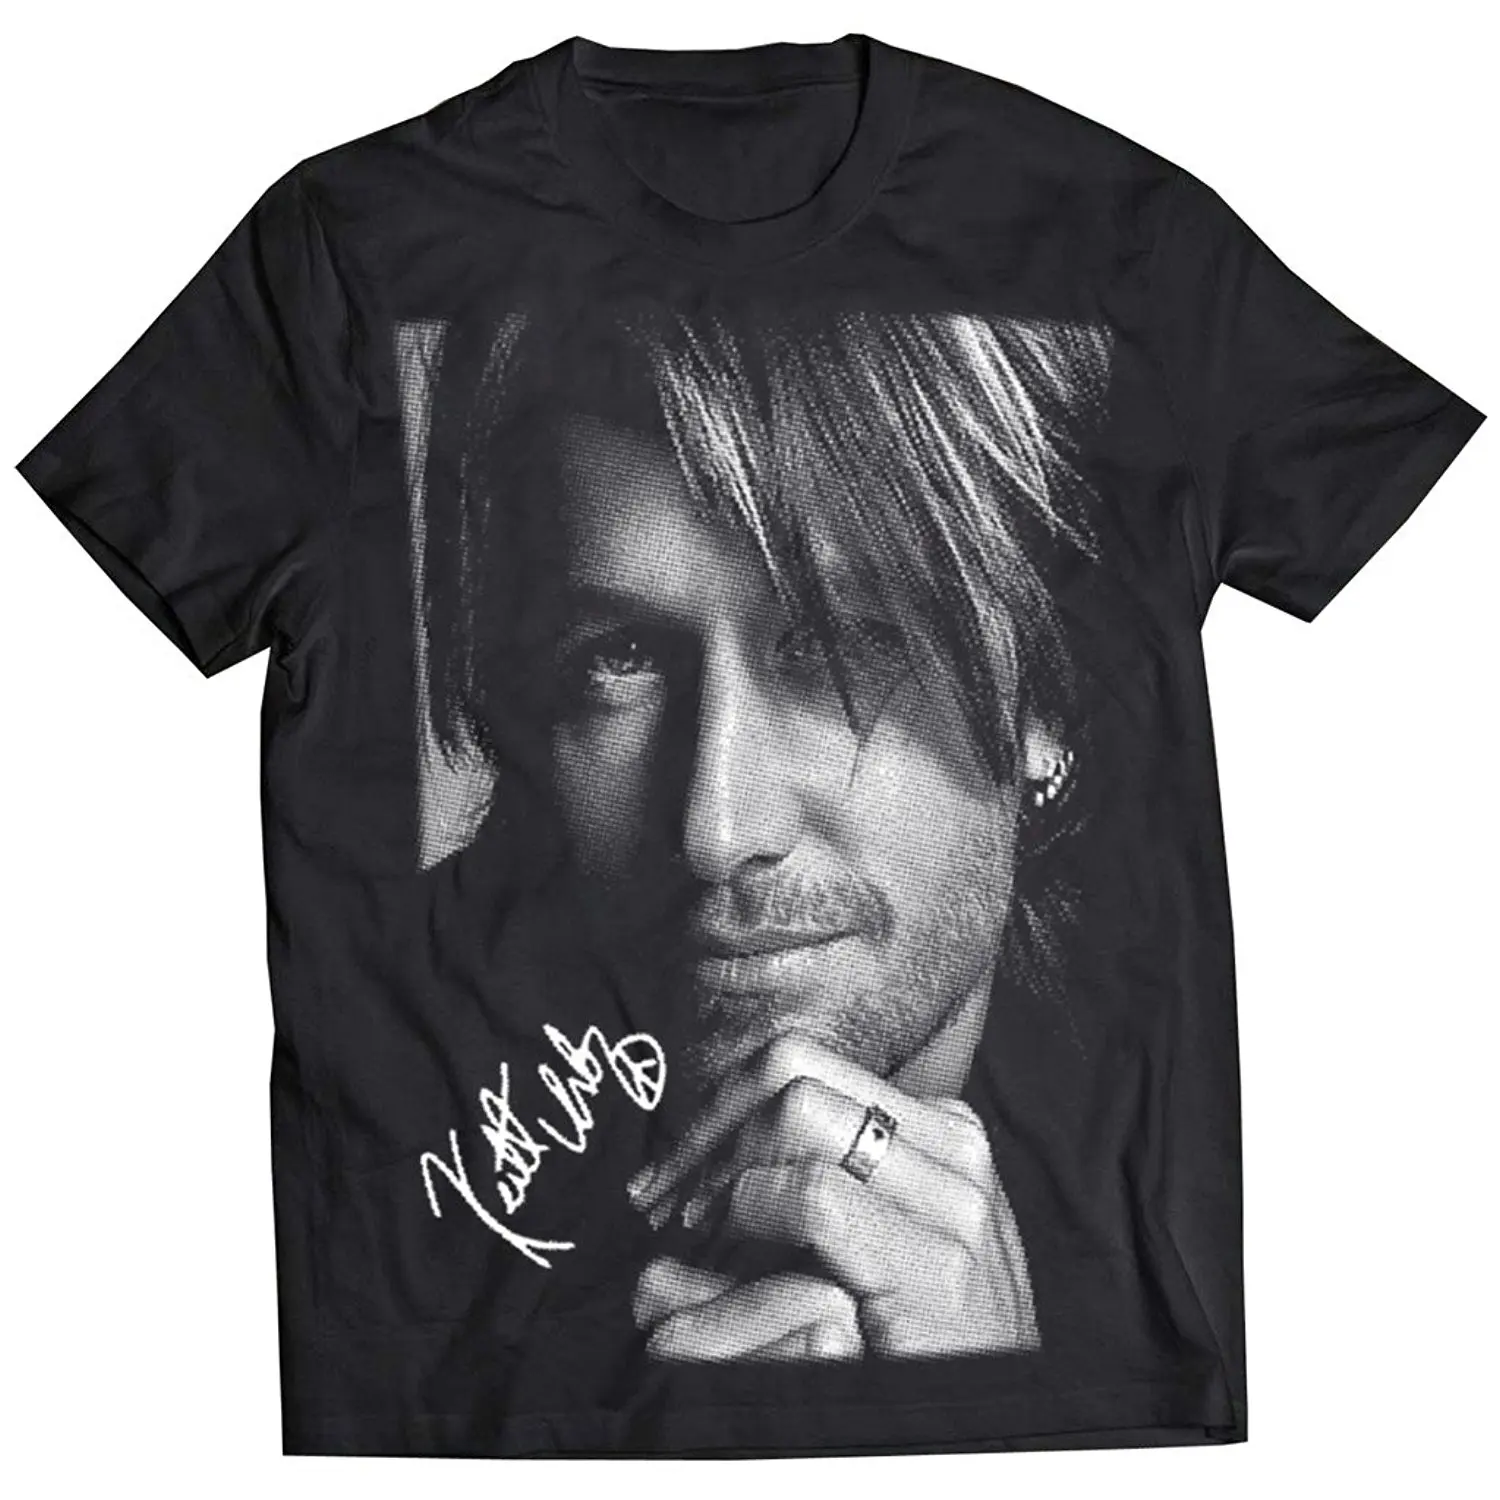 mazumi8 Keith Urban love country fan T Shirt-in T-Shirts from Men's ...